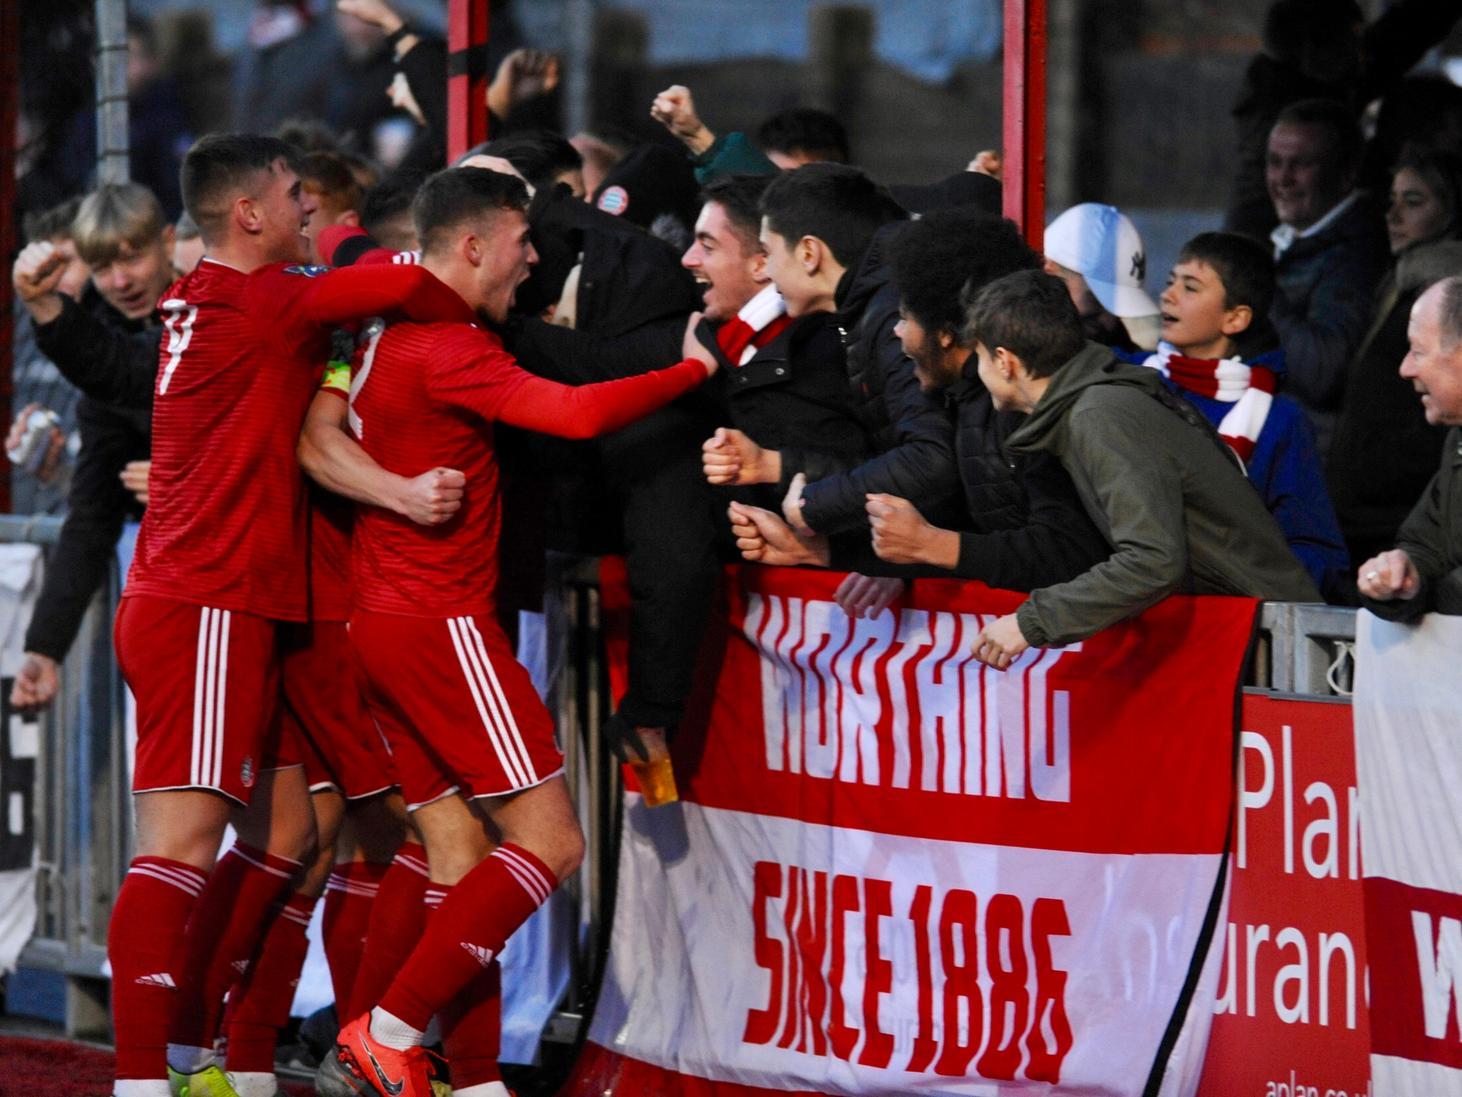 Worthing players celebrate with fans